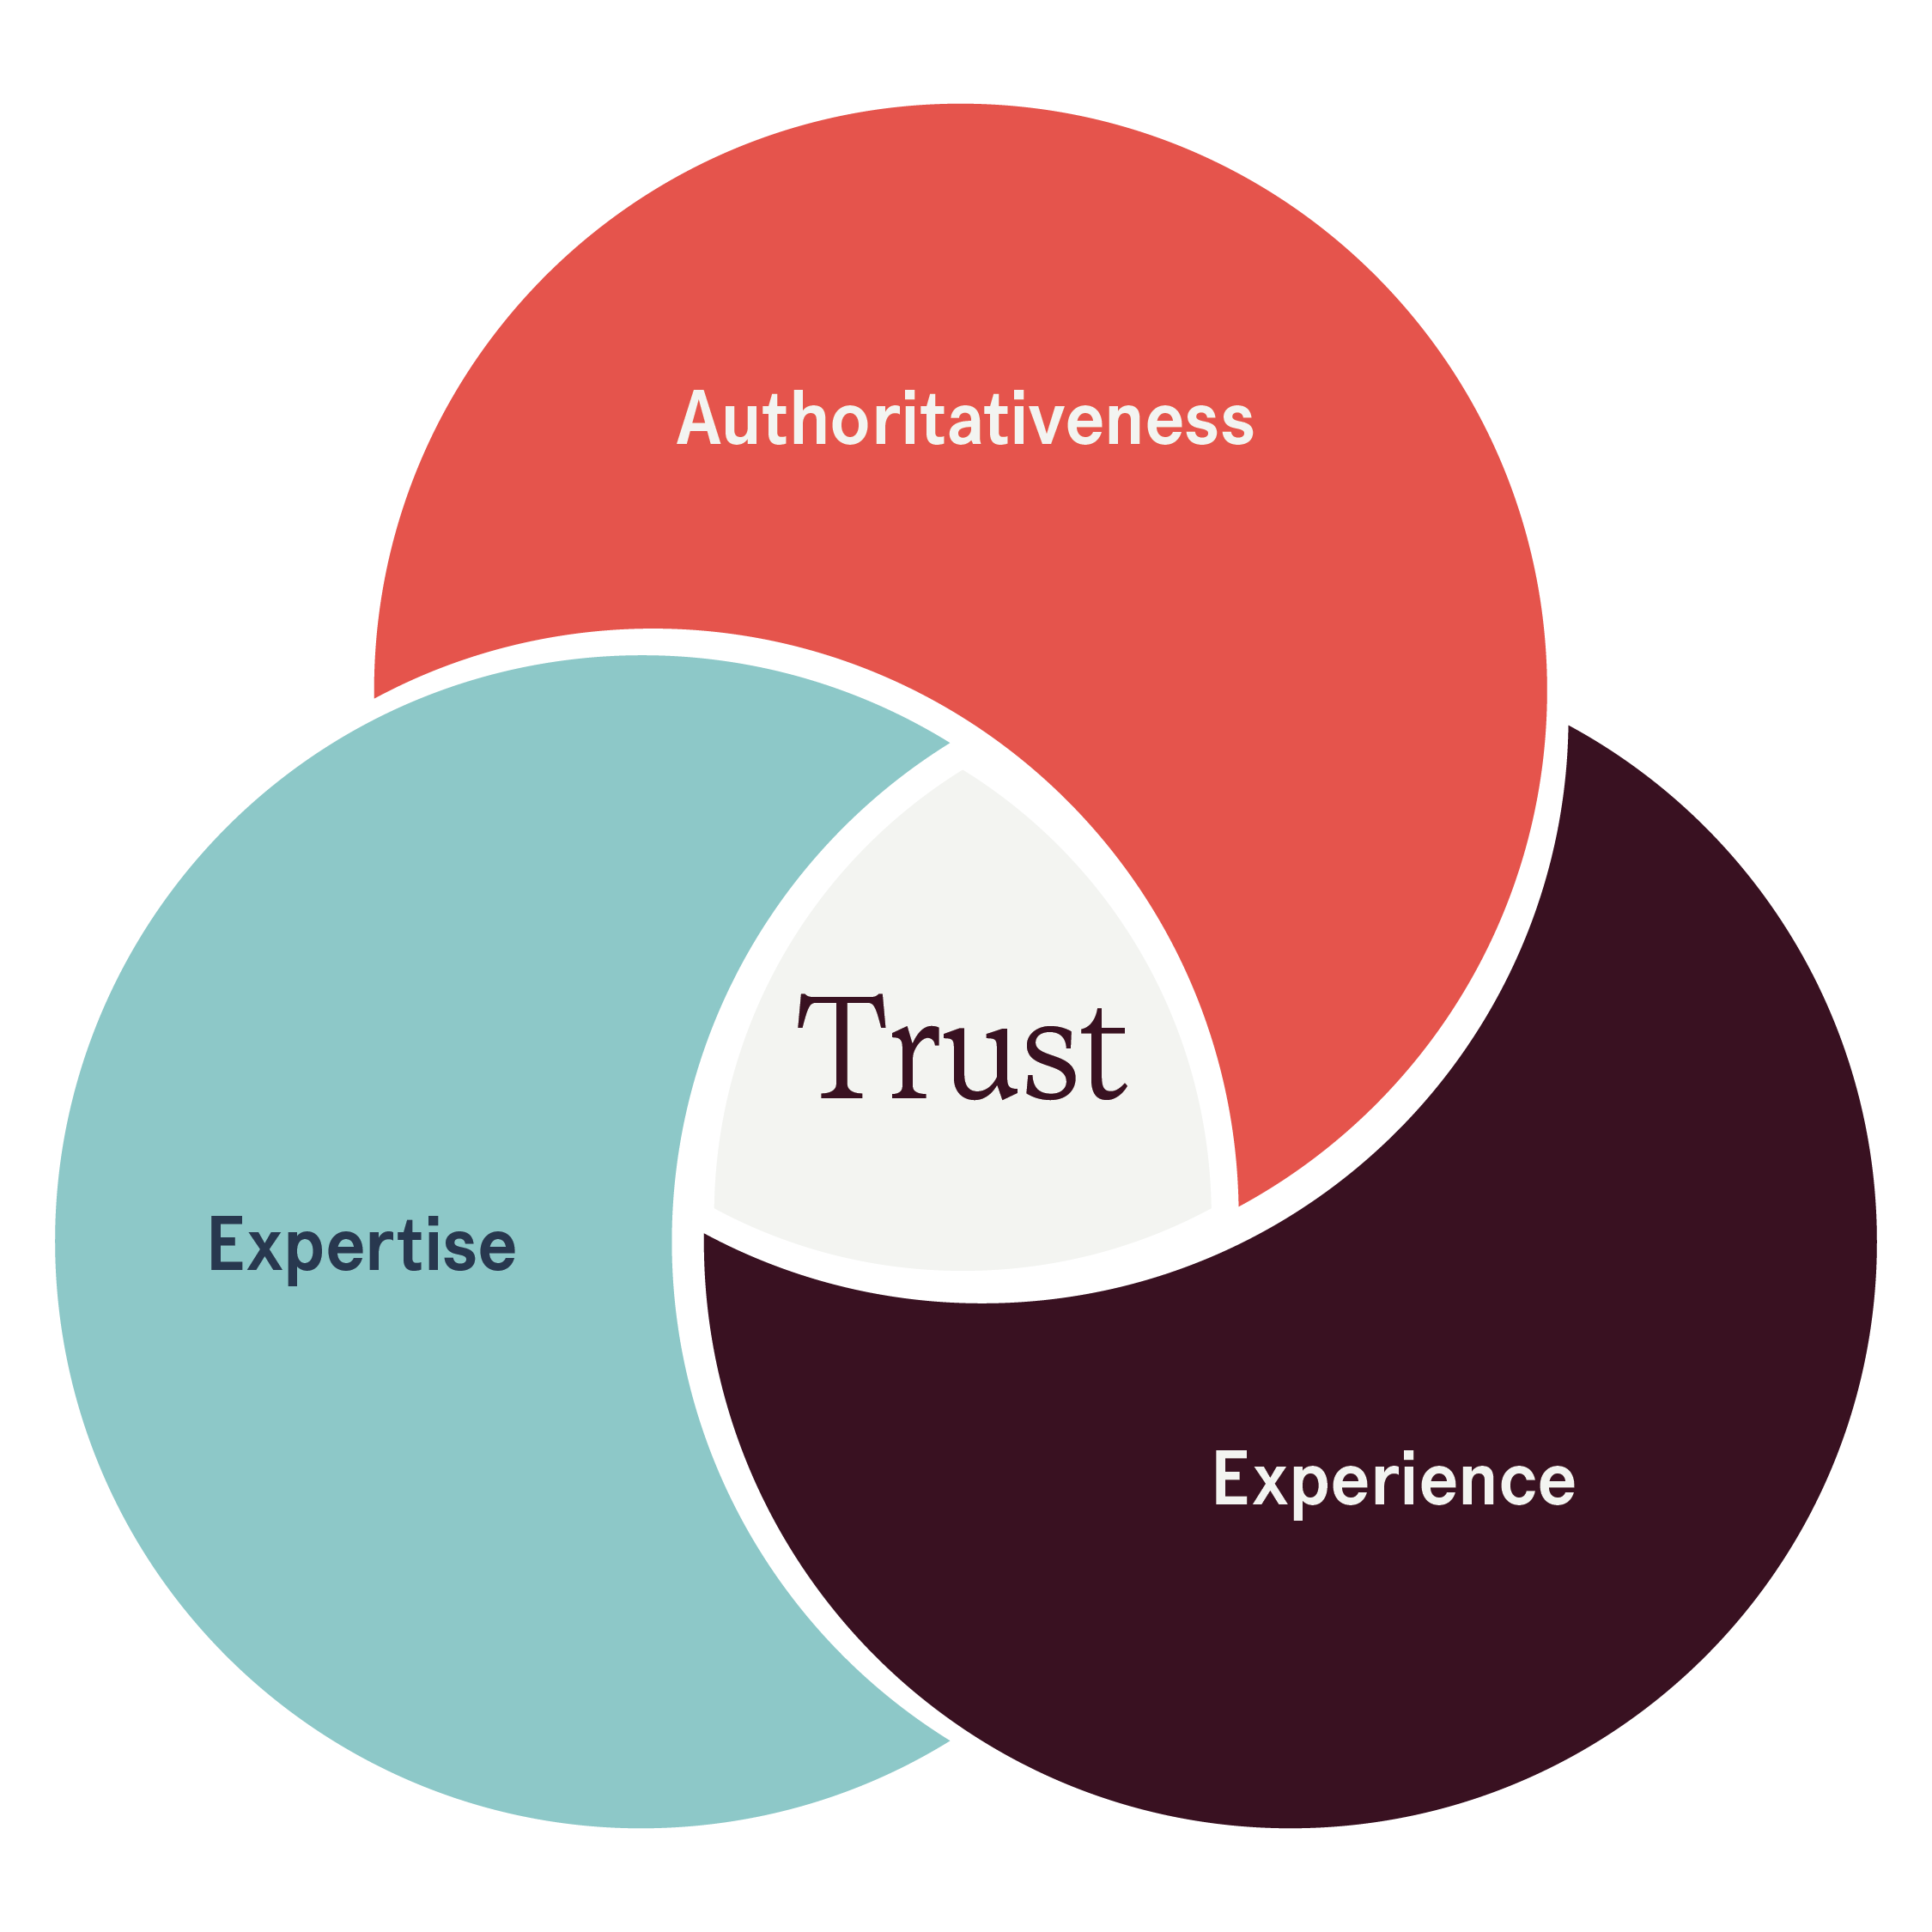 e-e-a-t meaning: experience, expertise, authority, and trust image with trust at the center